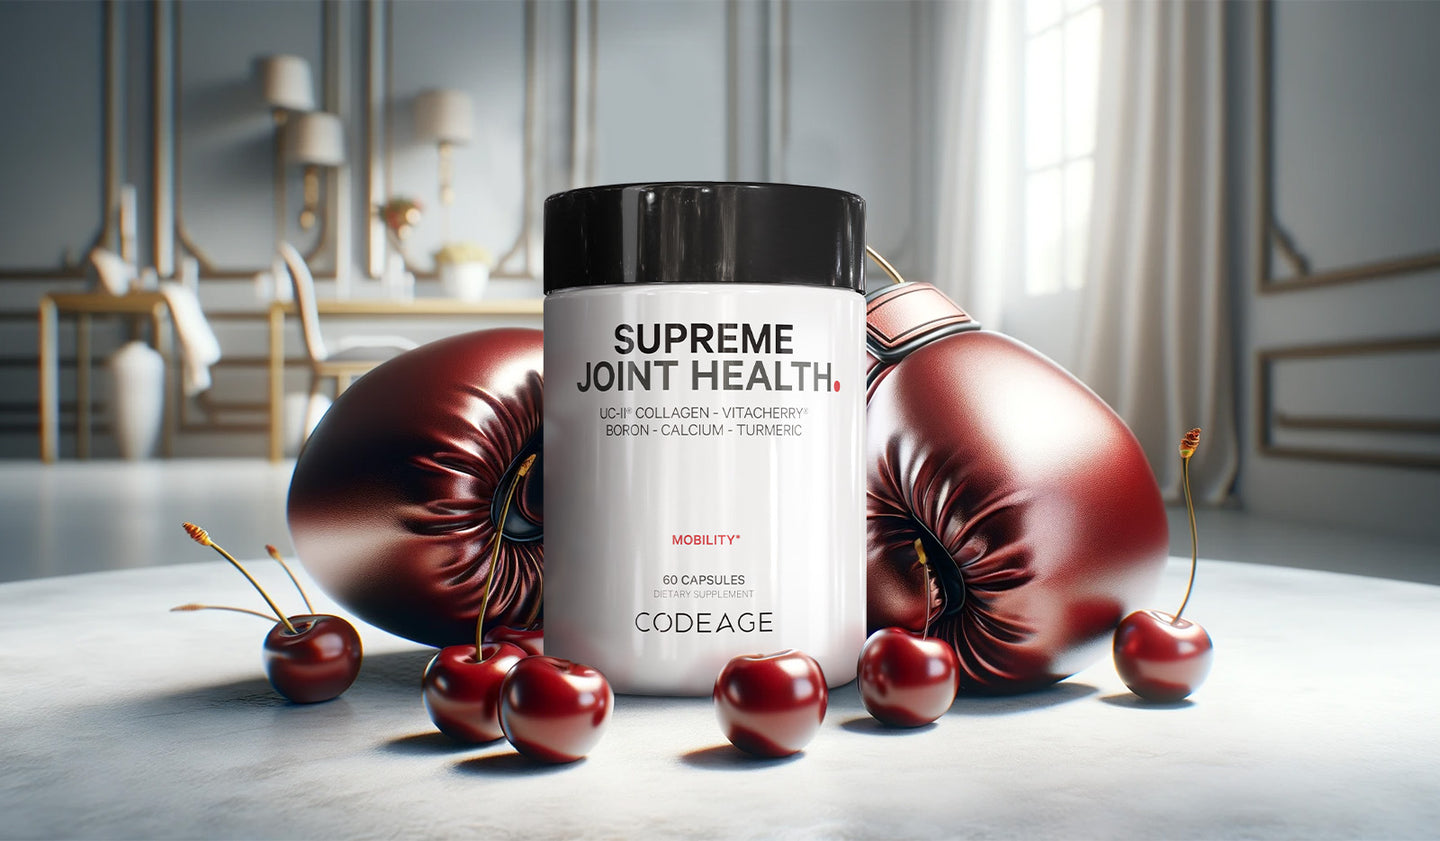 Collagen for Joints Collagen powder supplement for joint care peptides hydrolyzed muscles supreme joint health product